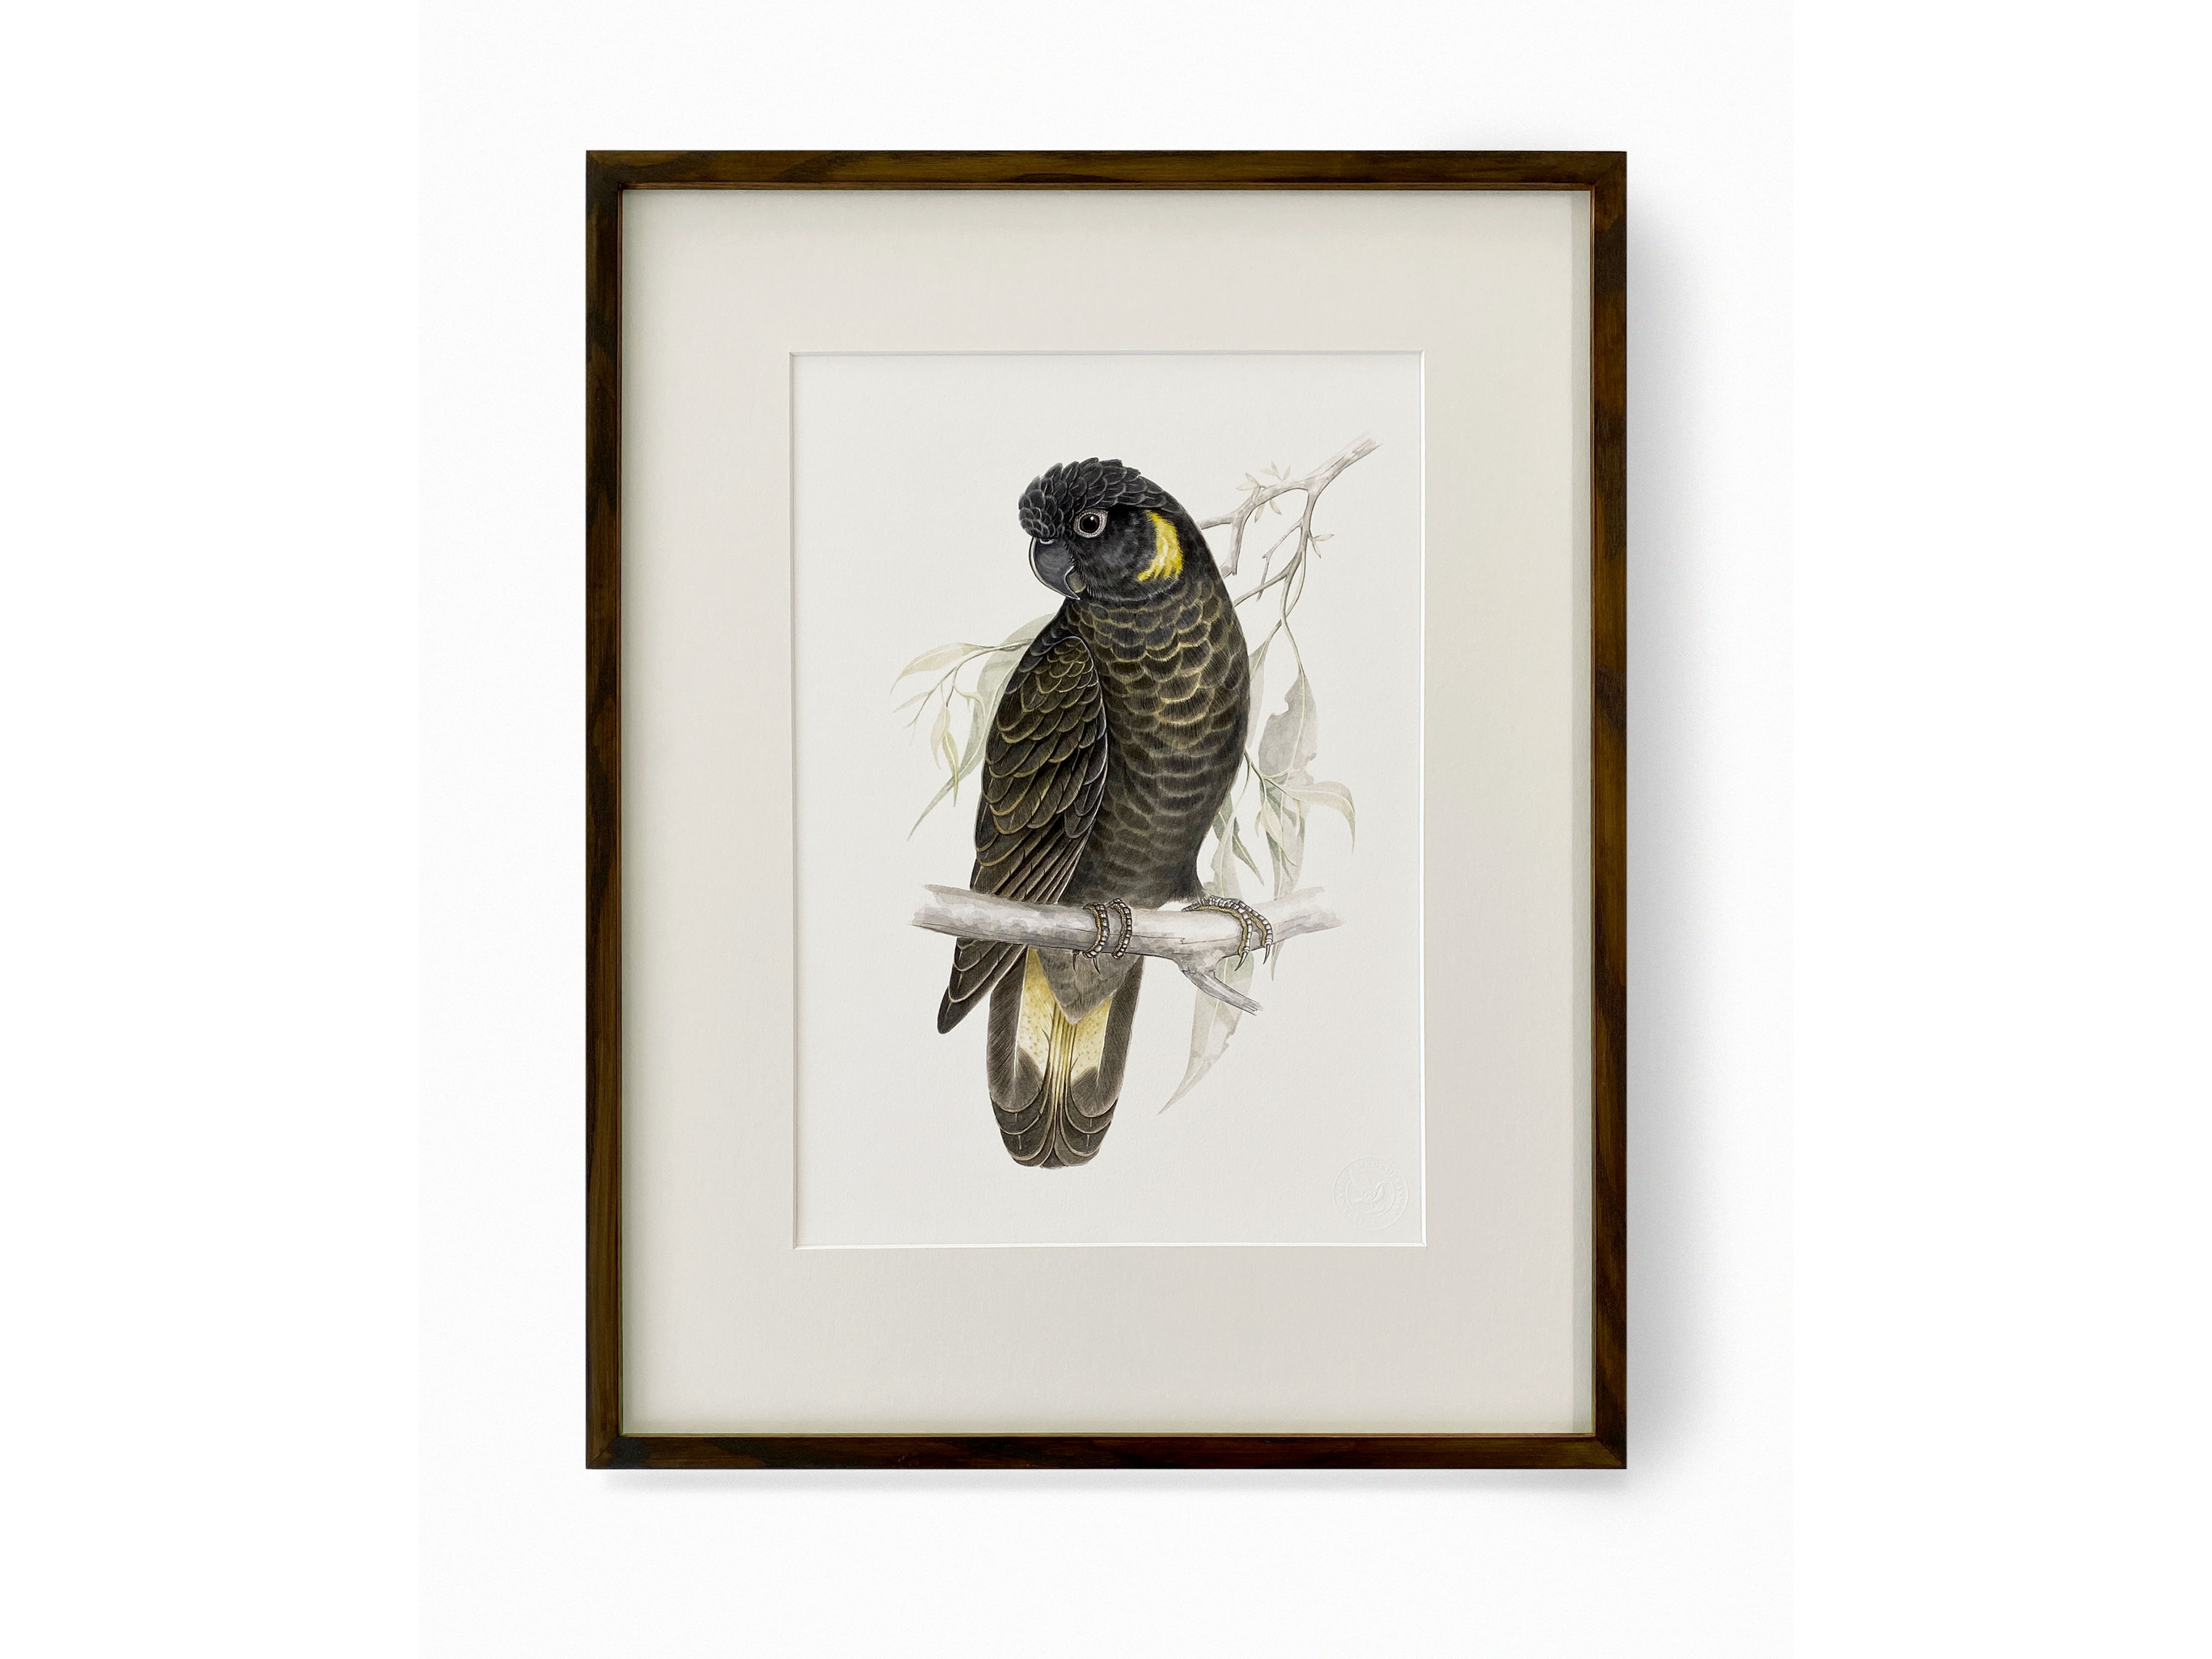 A framed print of a Yellow-tailed Black Cockatoo.